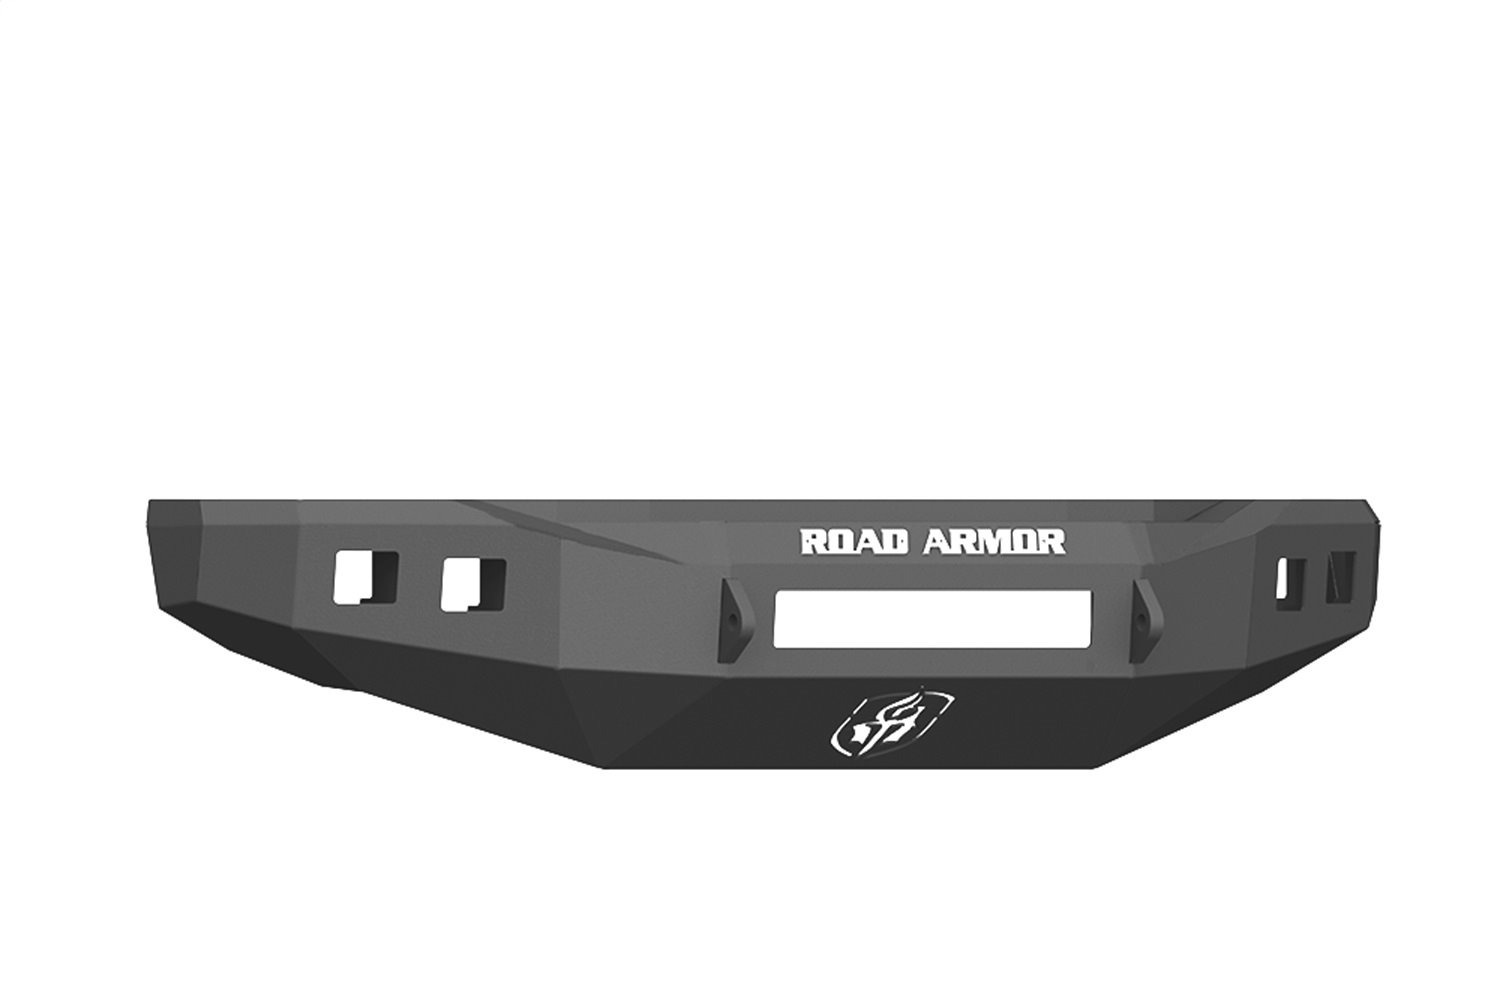 617F0B-NW Stealth Non-Winch Front Bumper, Steel, Satin Black, Fits Select Ford F-250/F-350 Super-Duty